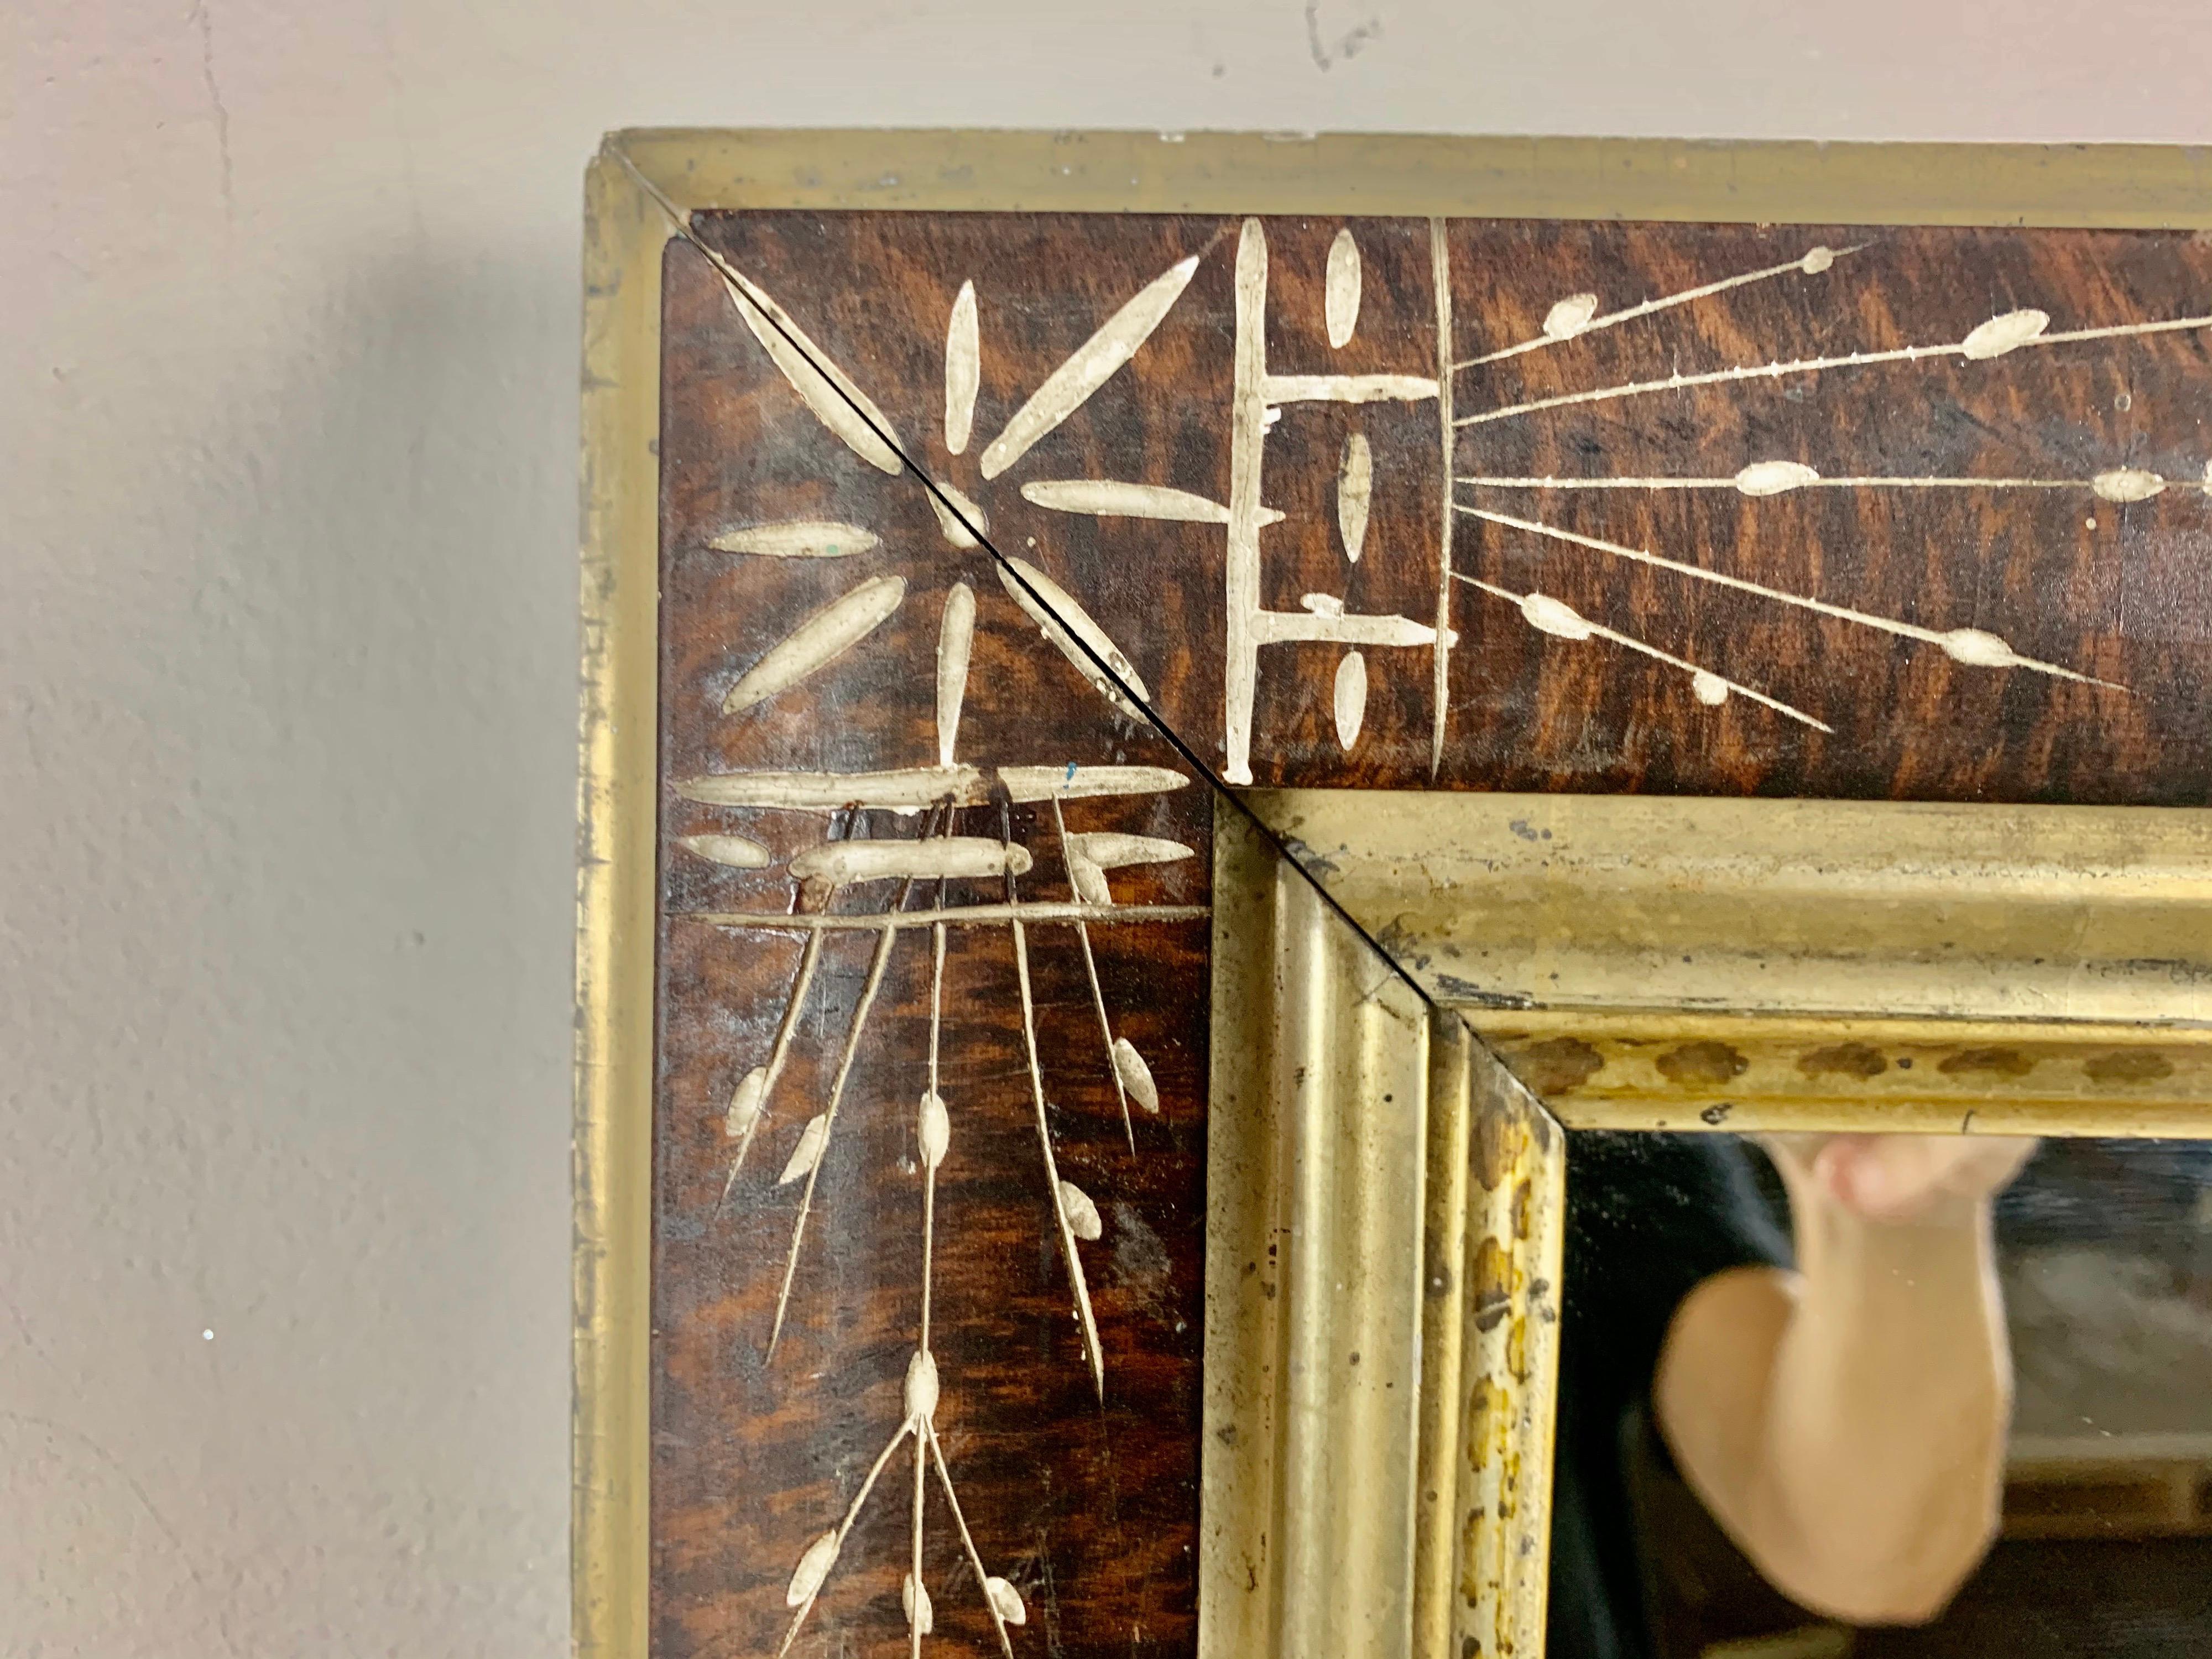 19th century English wood frame with mirror inset. The mirror is decorated with beautiful inlay designs throughout. Giltwood liner with stenciled detailing.